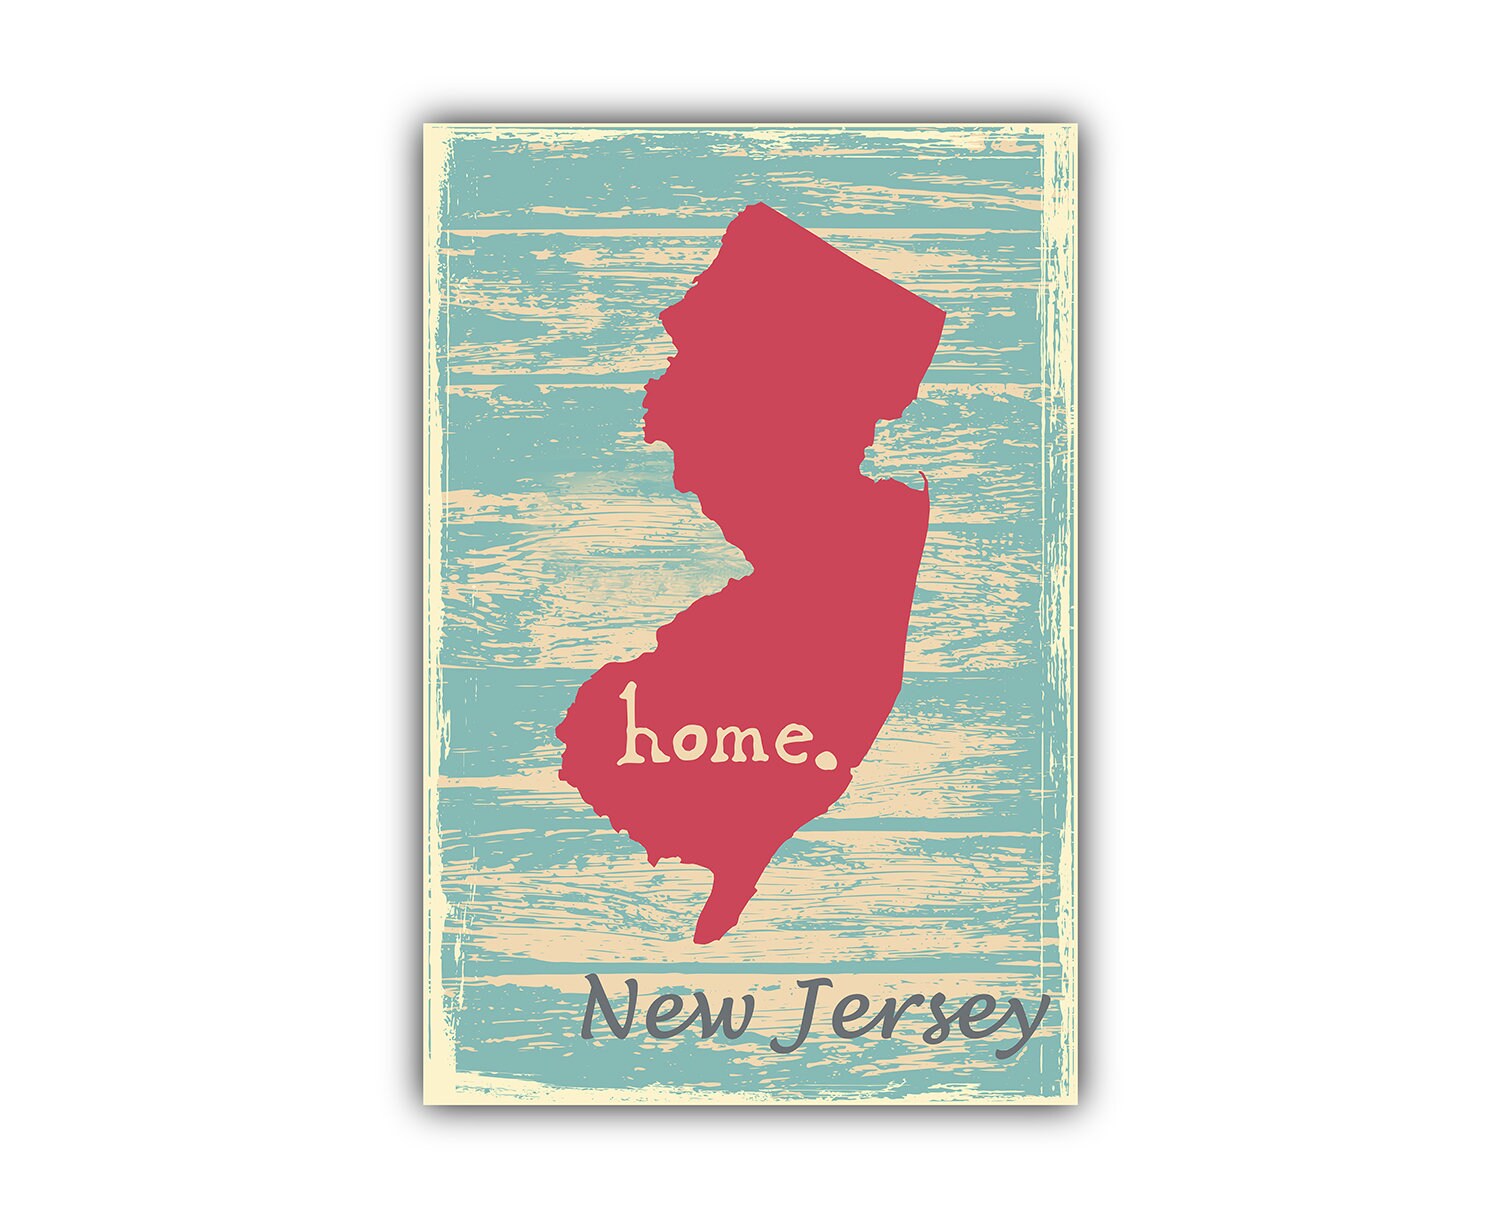 Retro style travel poster, New Jersey vintage poster print, Home wall  poster art, Office wall  decoration, New Jersey states map poster